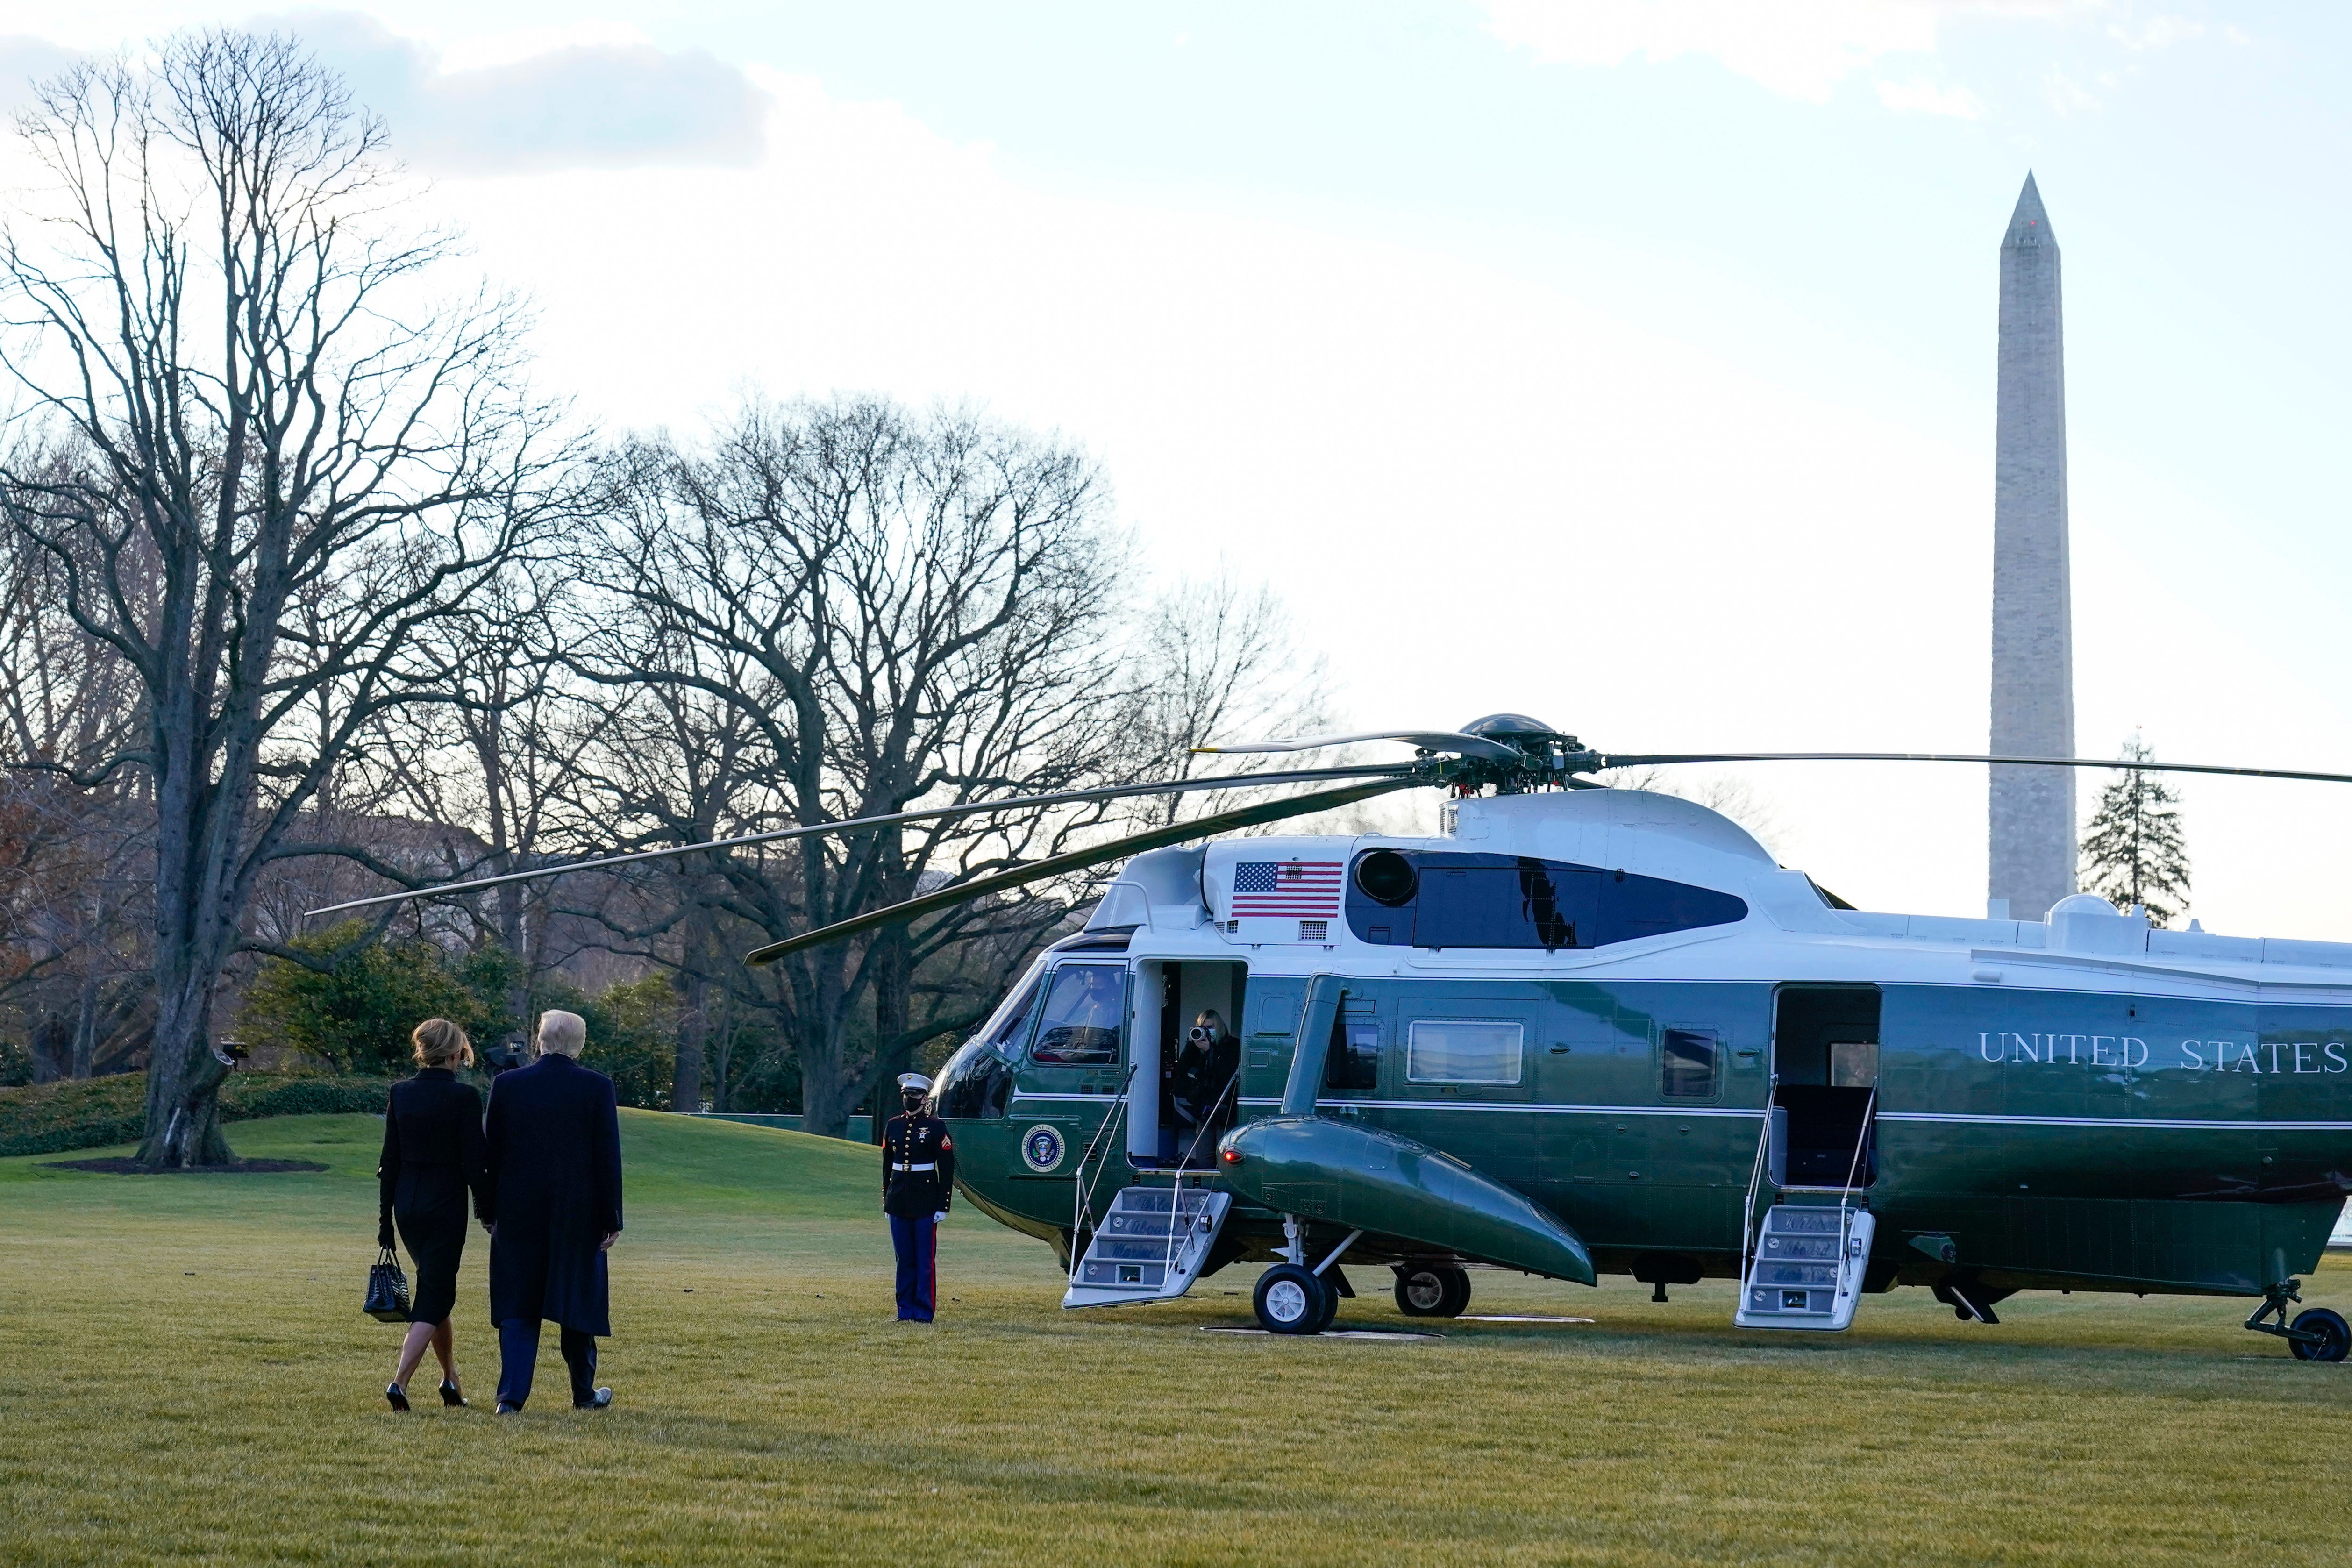 President Donald Trump and first lady Melania Trump walk to board Marine One on the South Lawn of the White House, Wednesday, Jan. 20, 2021, in Washington. Trump is en route to his Mar-a-Lago Florida Resort.